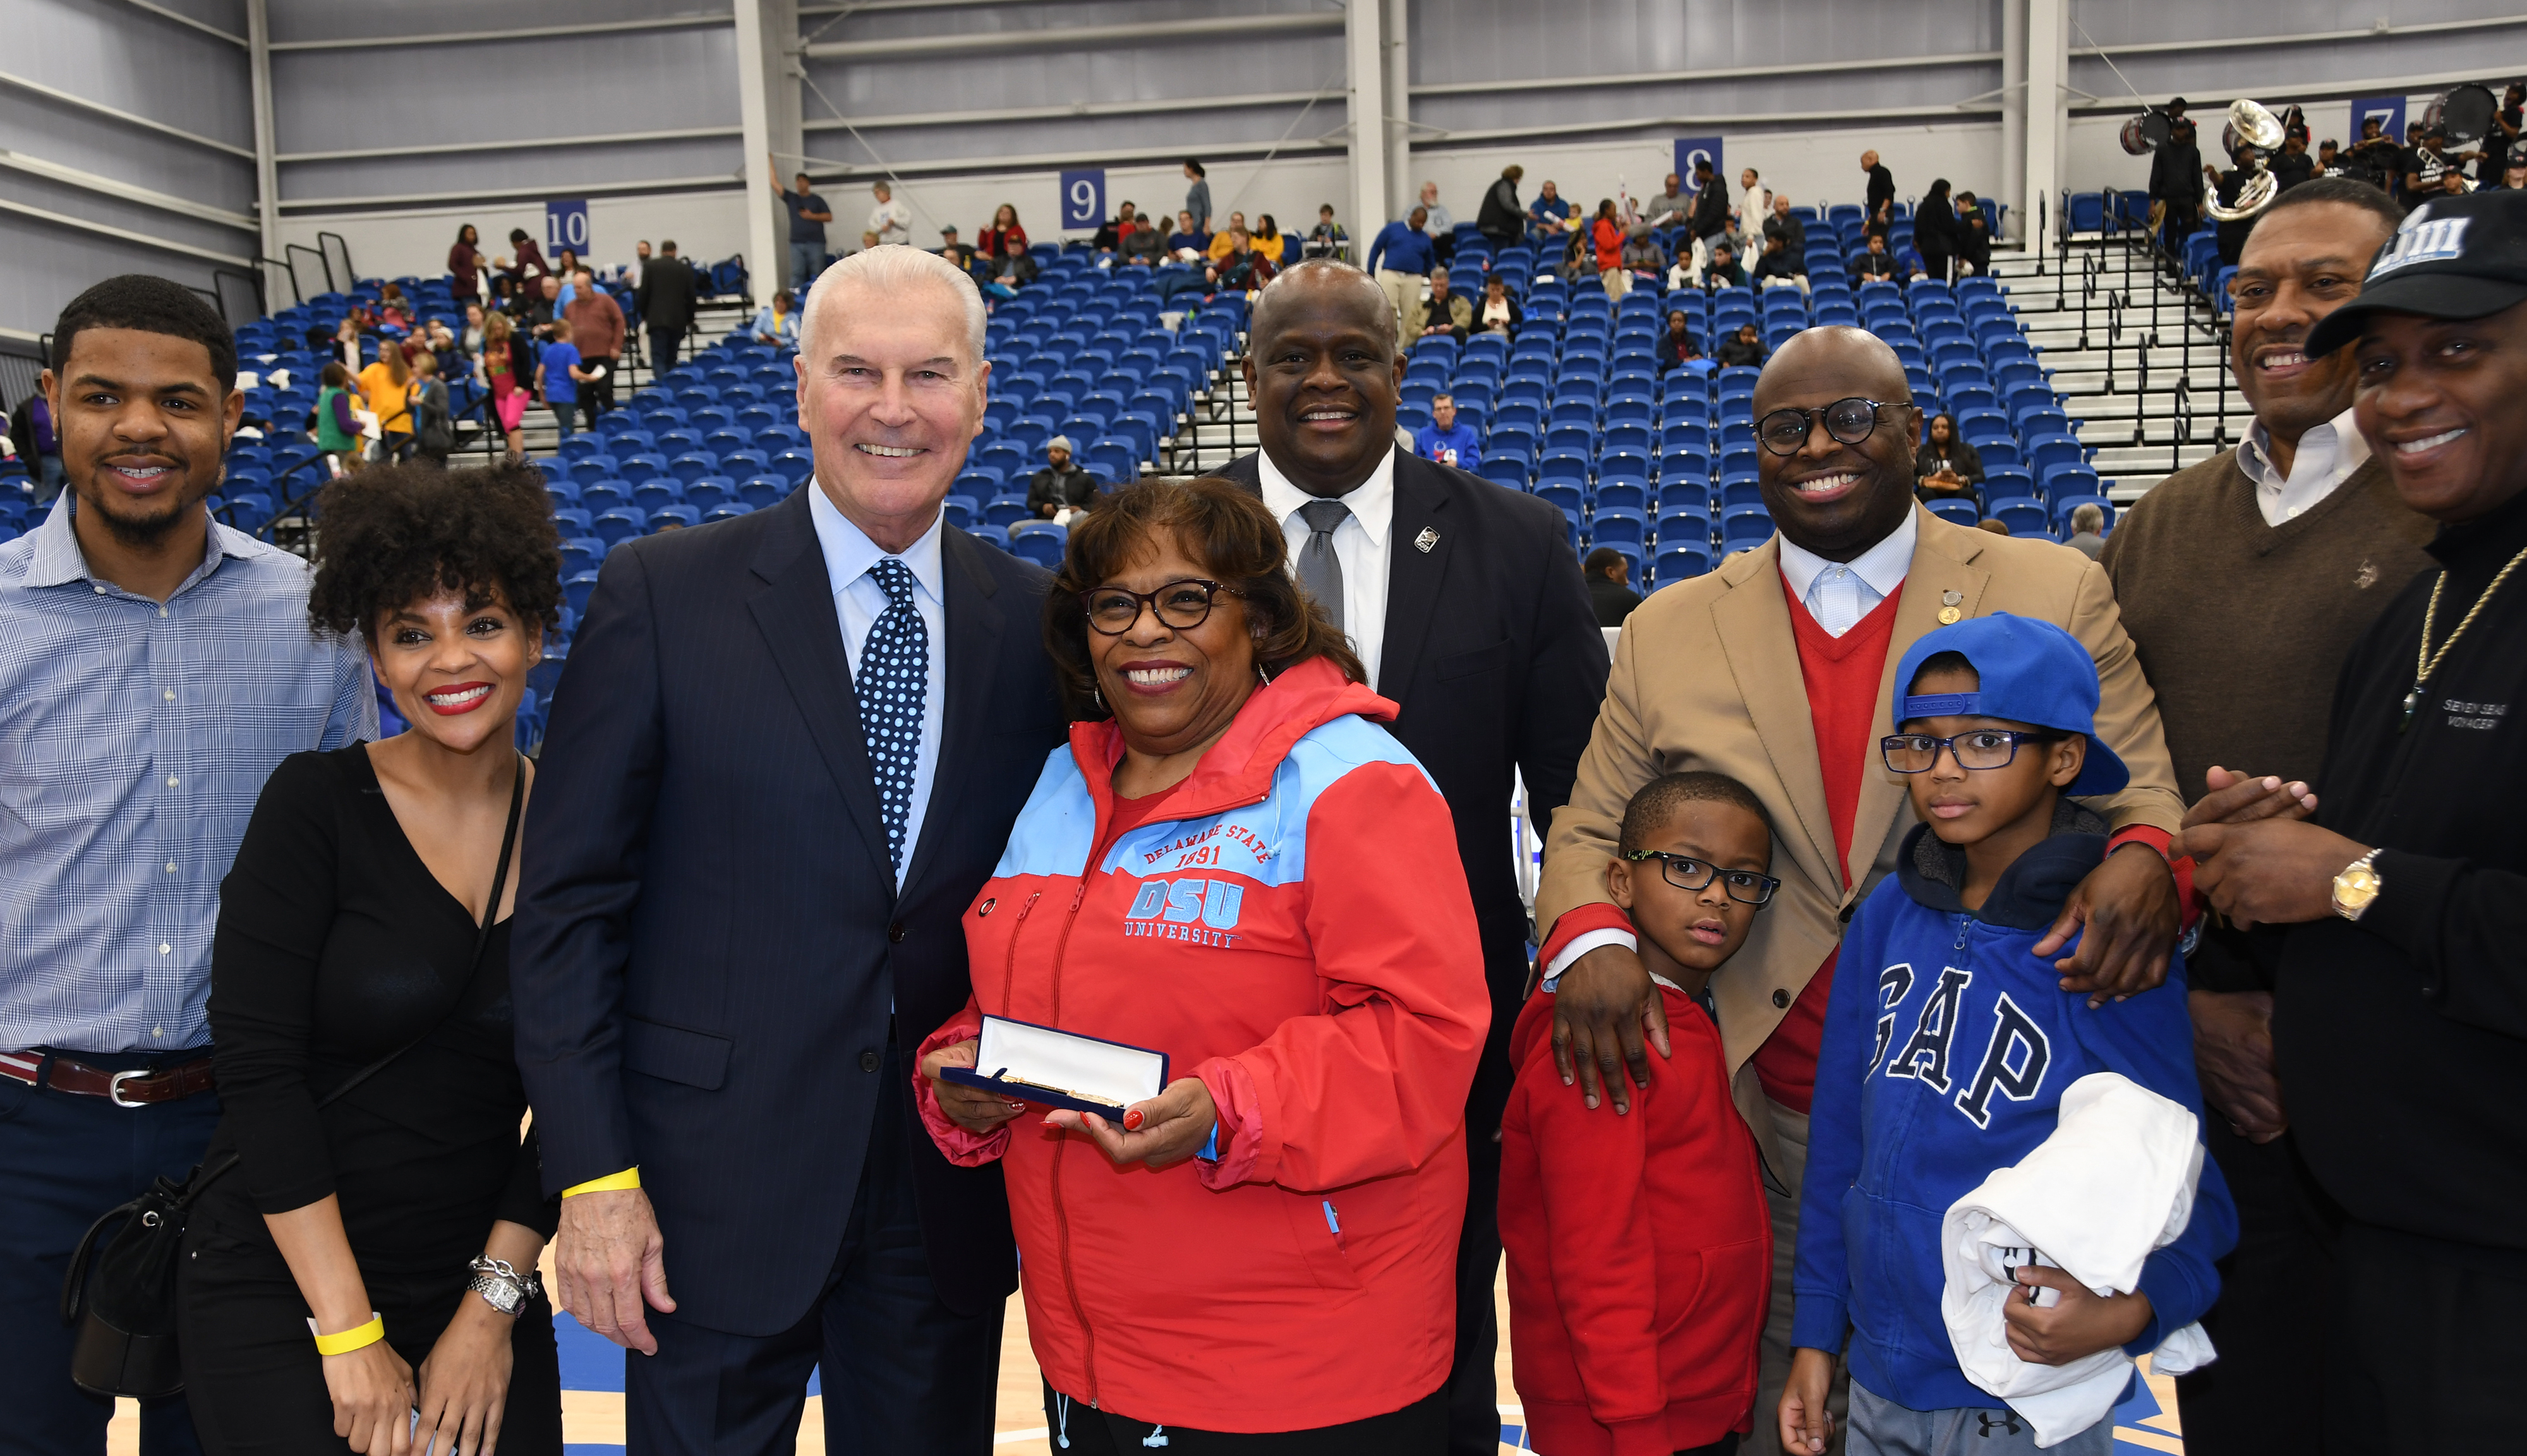 Dr. Wilma Mishoe stands next to Wilmington Mayor Michael Purzycki as she is honored  by the city as part of their annual Black History Month celebration at the 76er Fieldhouse as part of the Long Island Nets vs. Delaware Blue Coats basketball game. Standing around them are city officials and DSU community members.